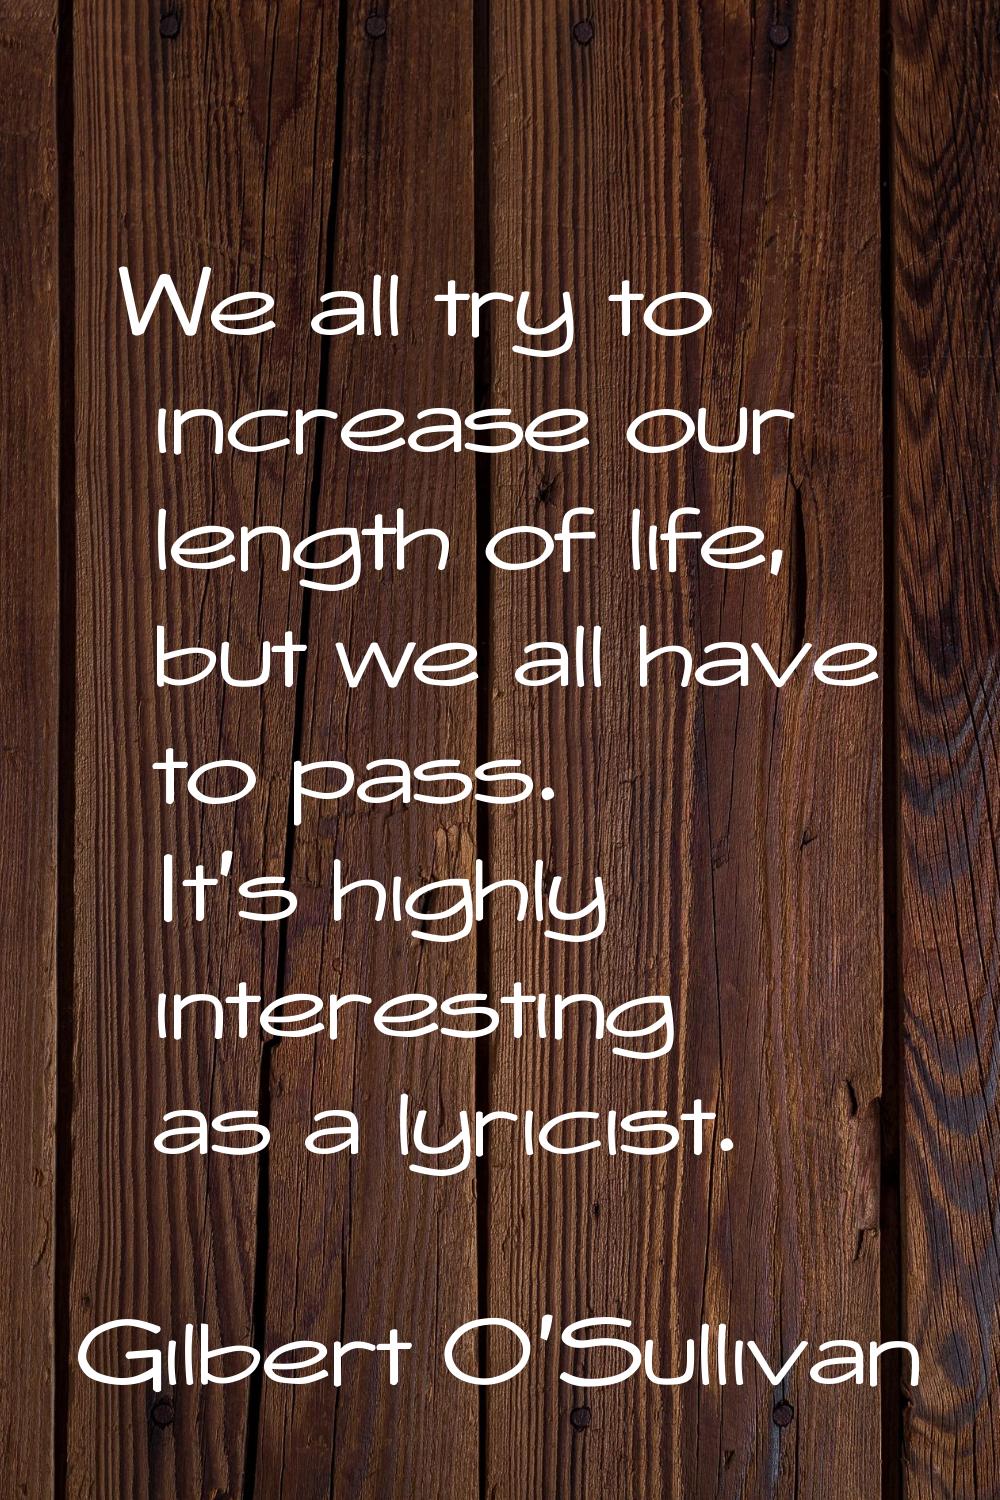 We all try to increase our length of life, but we all have to pass. It's highly interesting as a ly